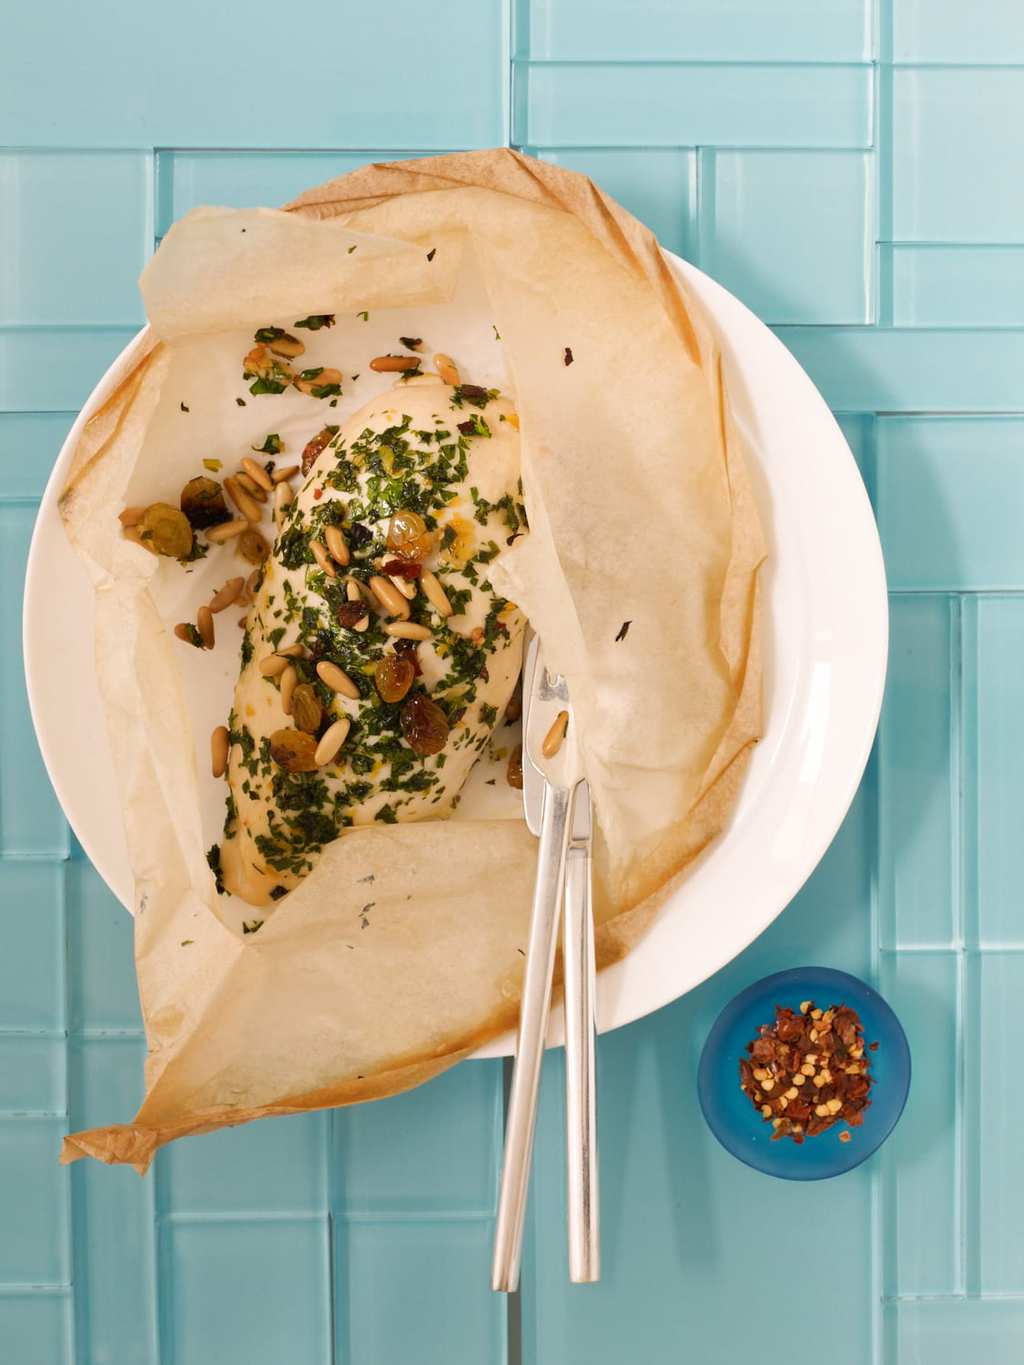 baked chicken in paper with raisins and pine nuts on blue tile